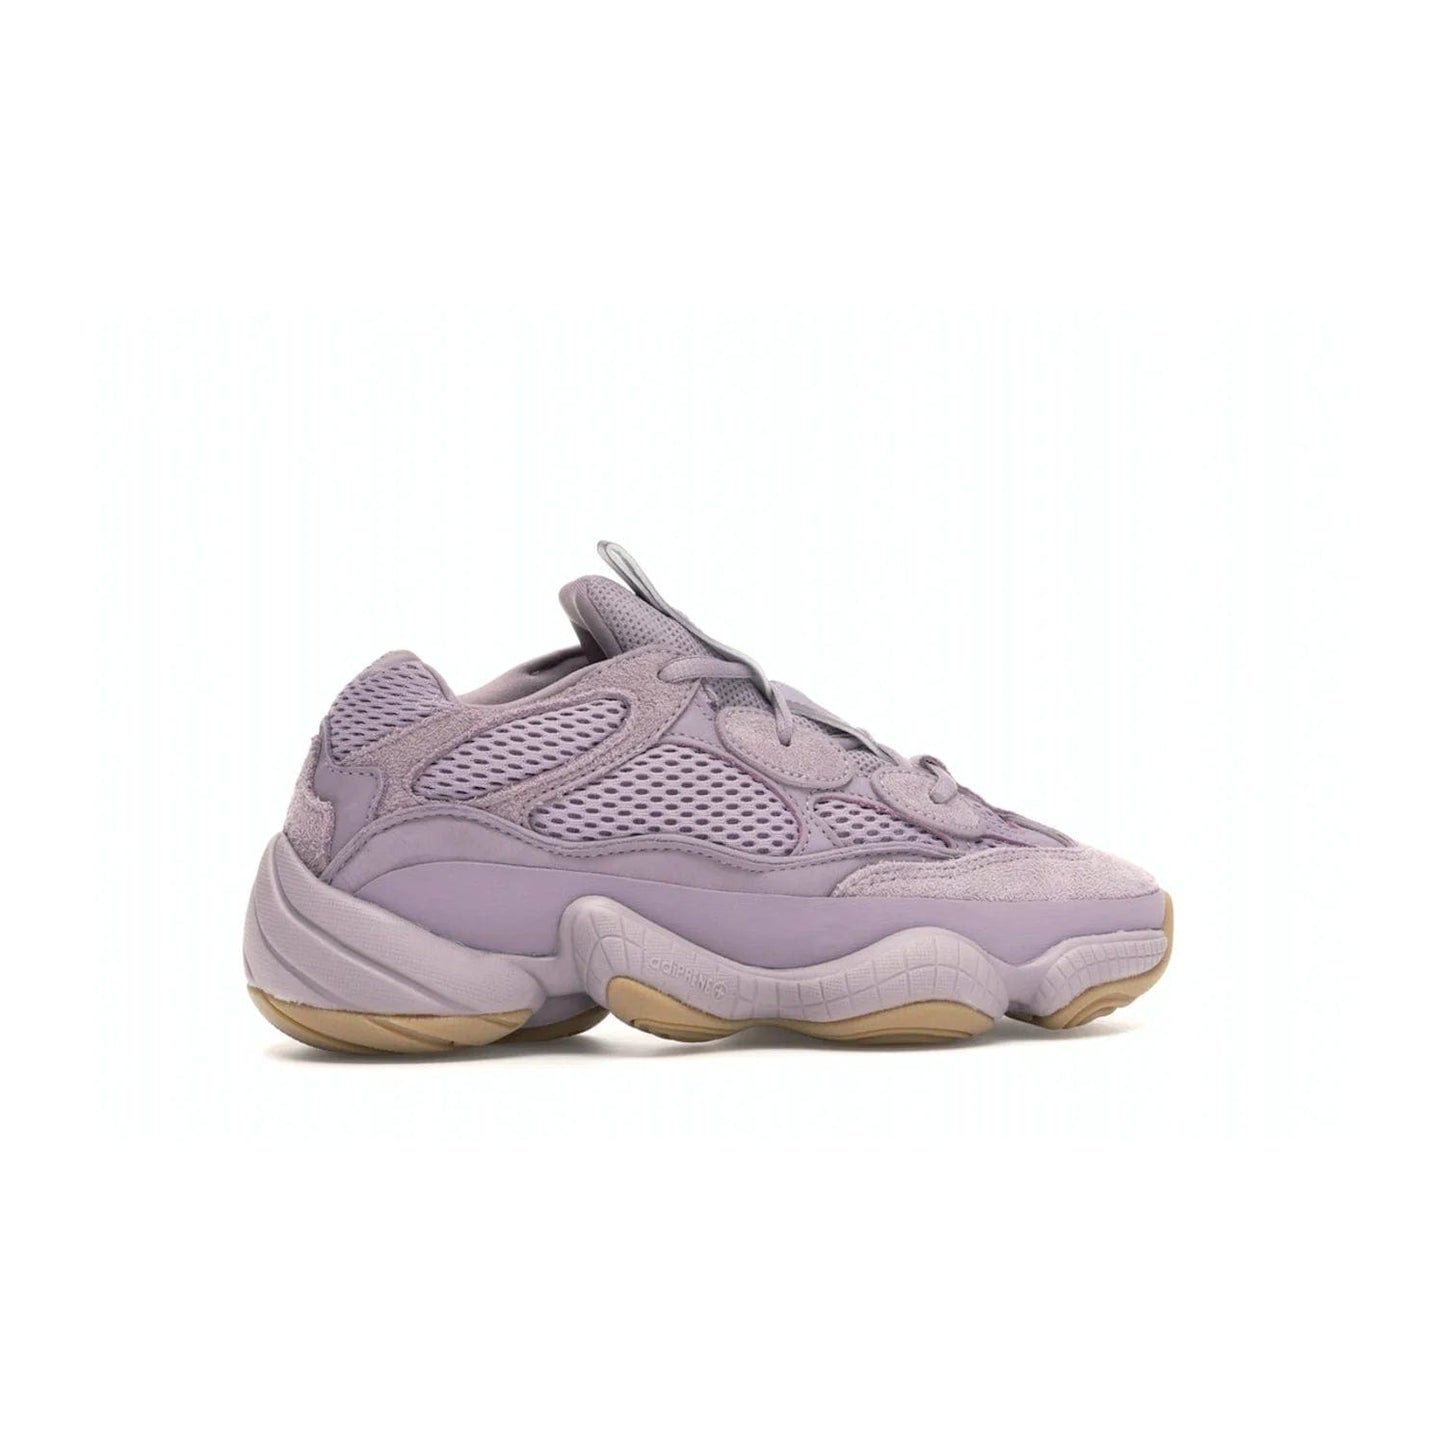 adidas Yeezy 500 Soft Vision - Image 35 - Only at www.BallersClubKickz.com - New adidas Yeezy 500 Soft Vision sneaker featuring a combination of mesh, leather, and suede in a classic Soft Vision colorway. Gum rubber outsole ensures durability and traction. An everyday sneaker that stands out from the crowd.